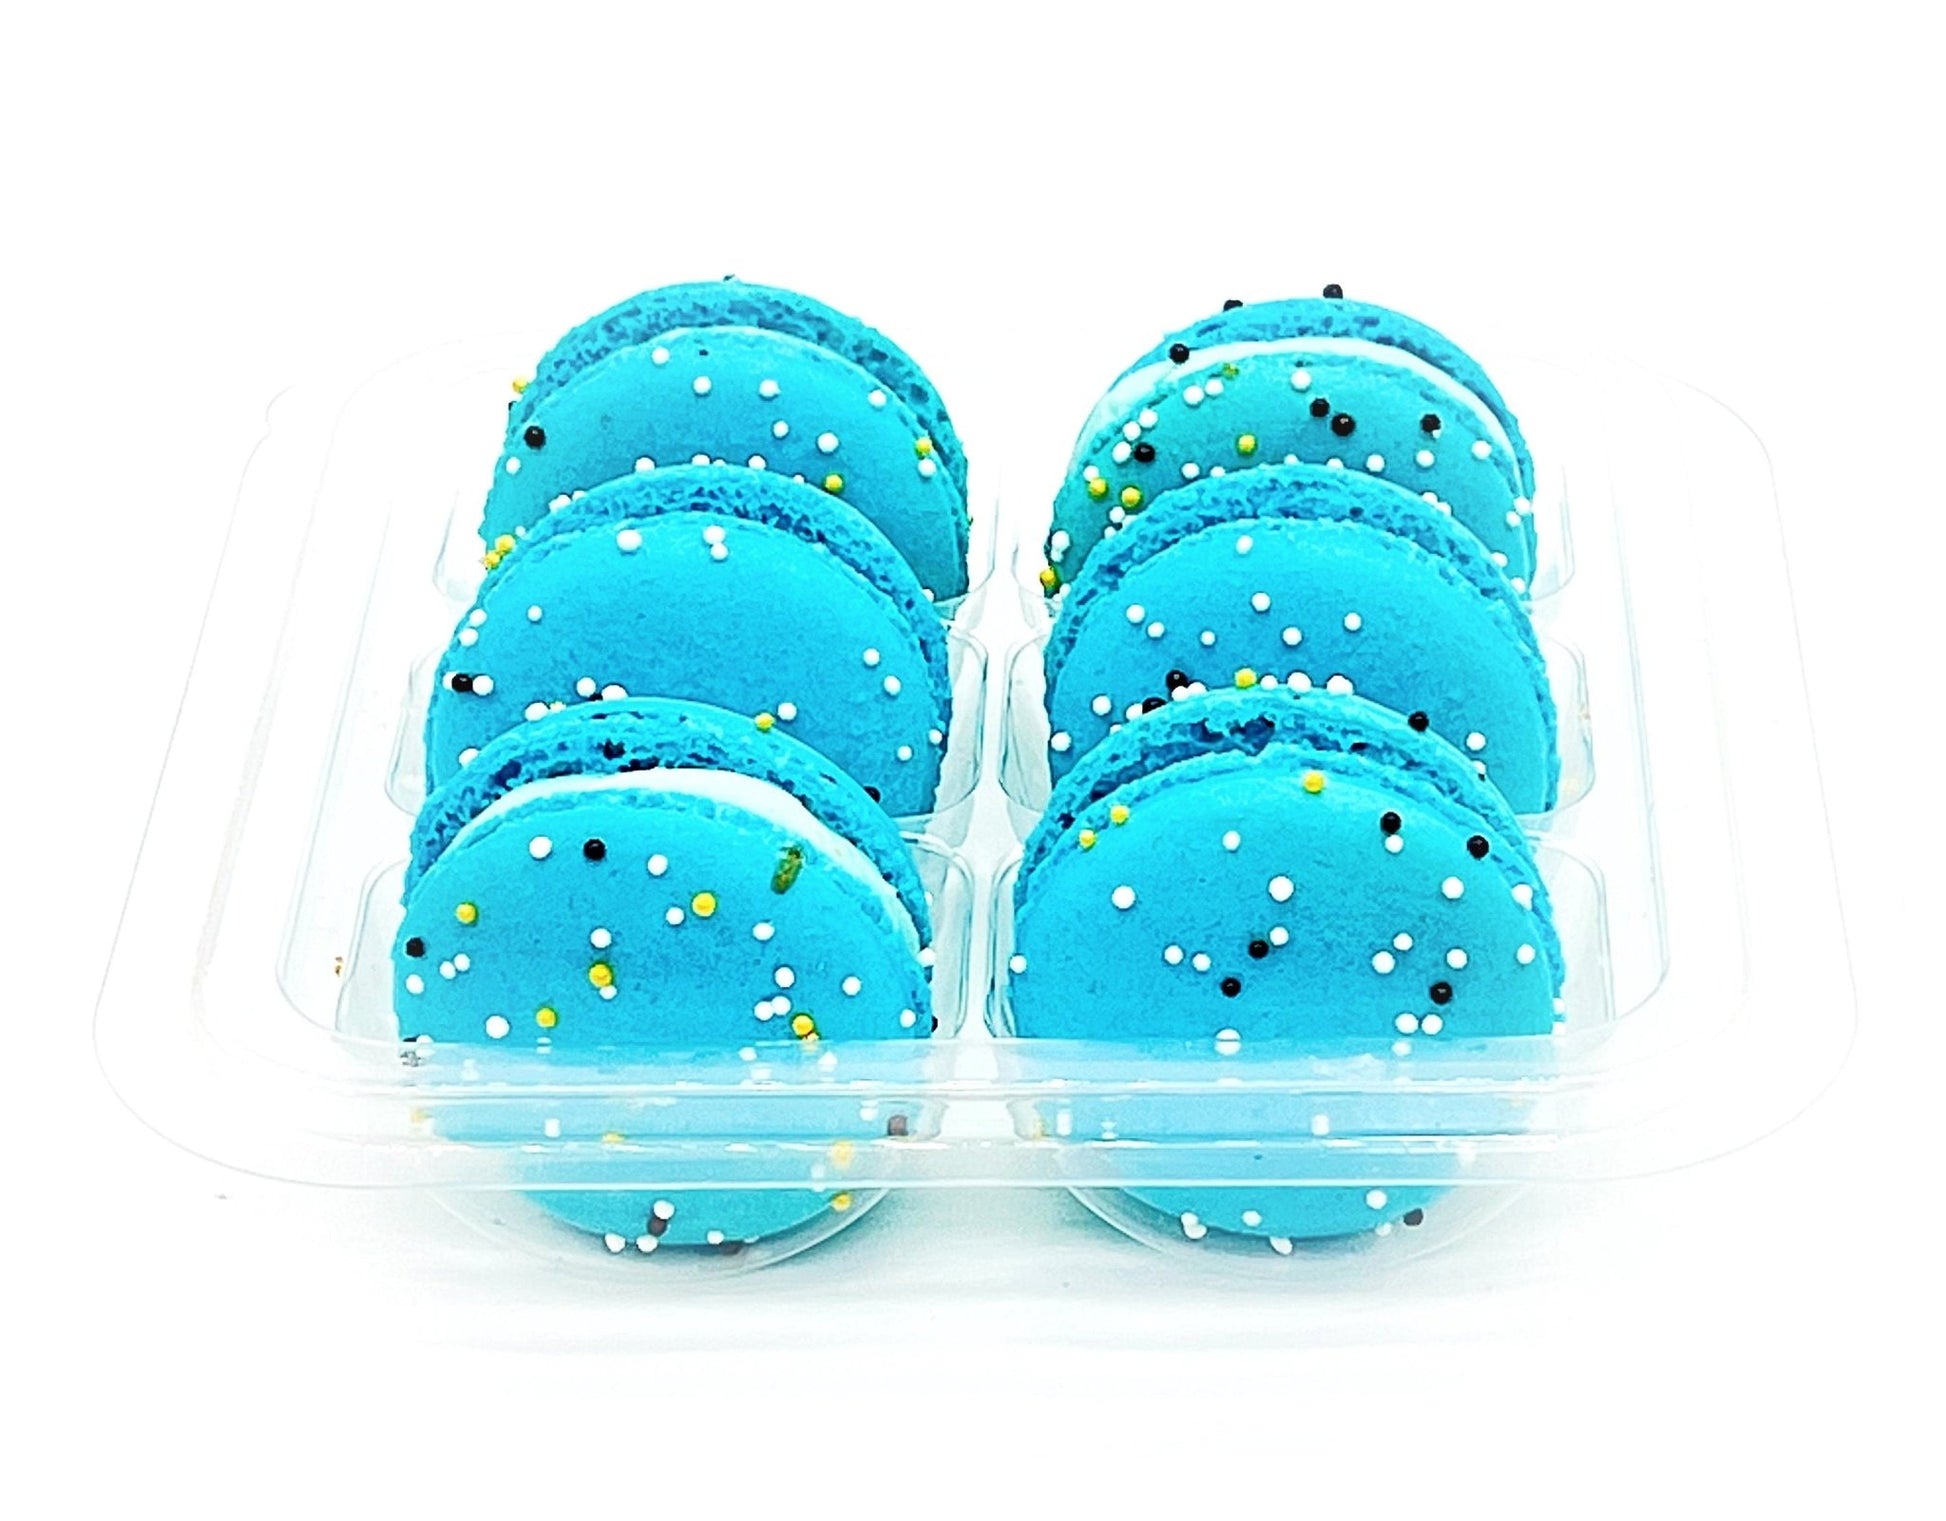 Blueberry Milk Jam French Macaron | Available in 6, 12 & 24 - Macaron Centrale6 Pack